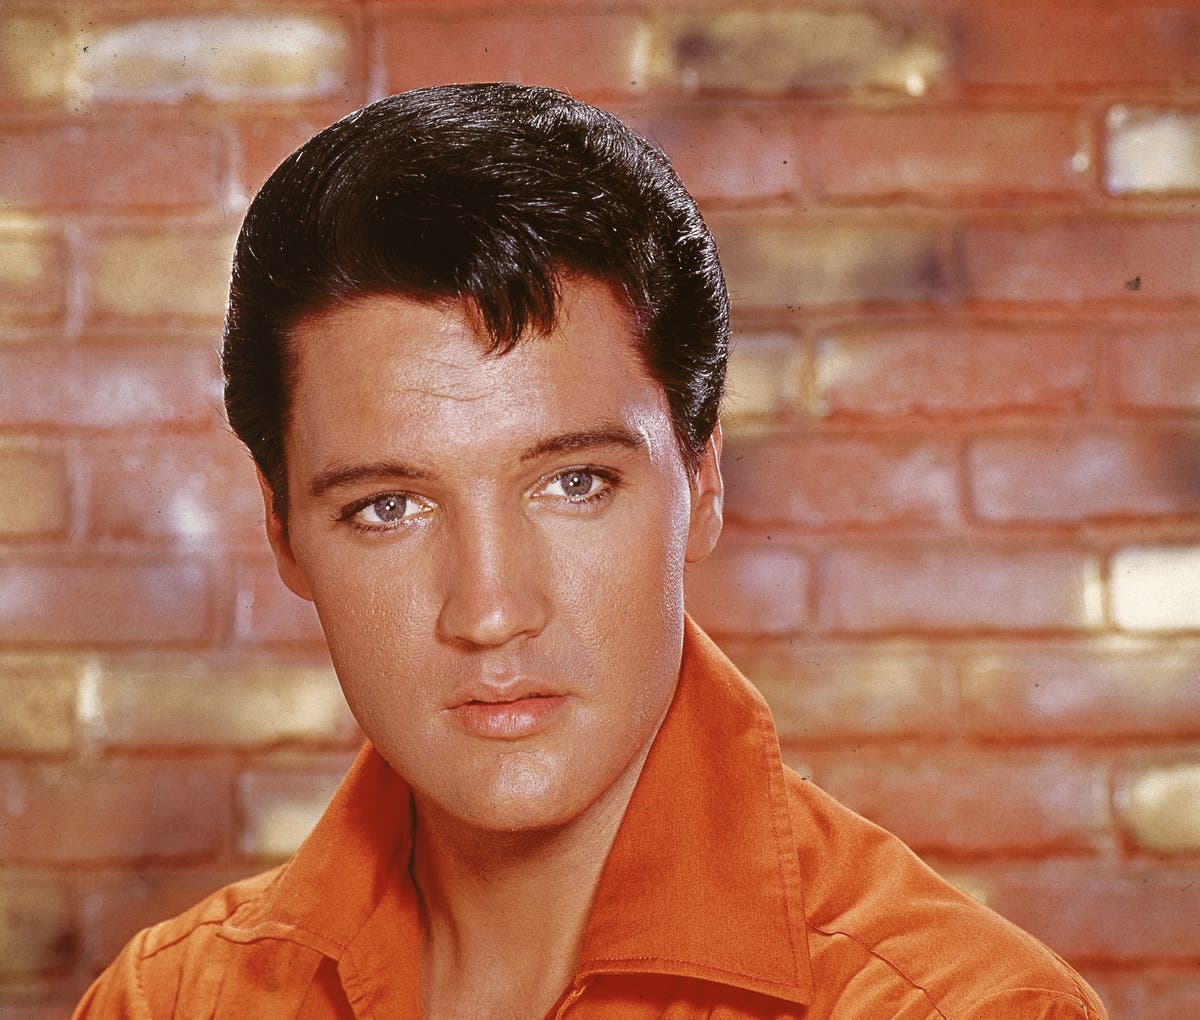 Elvis’ stepbrother apologises for making ‘derogatory comments’ about singer’s death